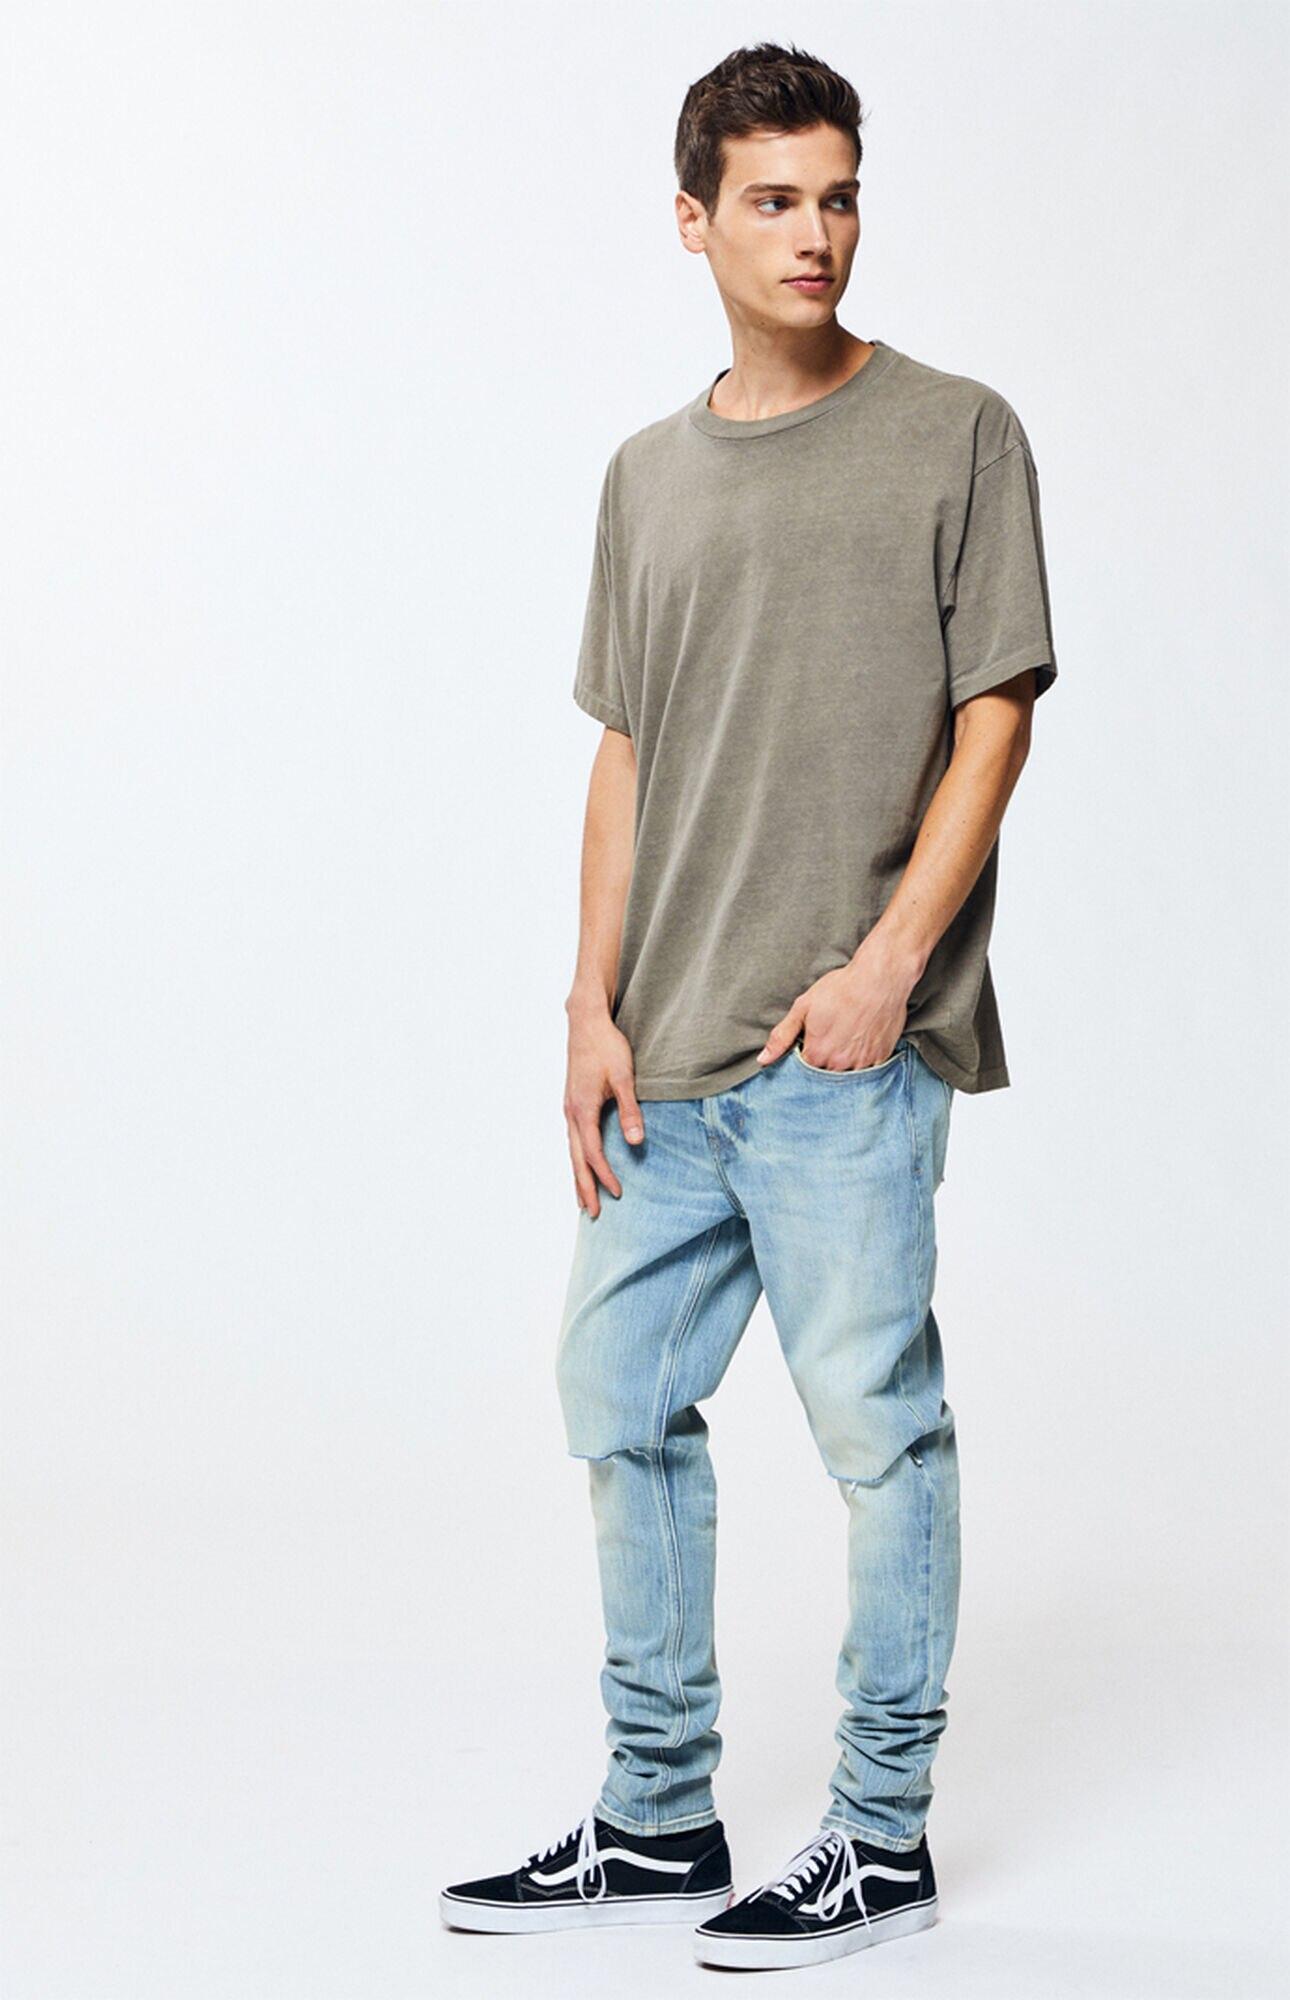 PacSun Denim Light Ripped Stacked Skinny Jeans in Blue for Men - Lyst